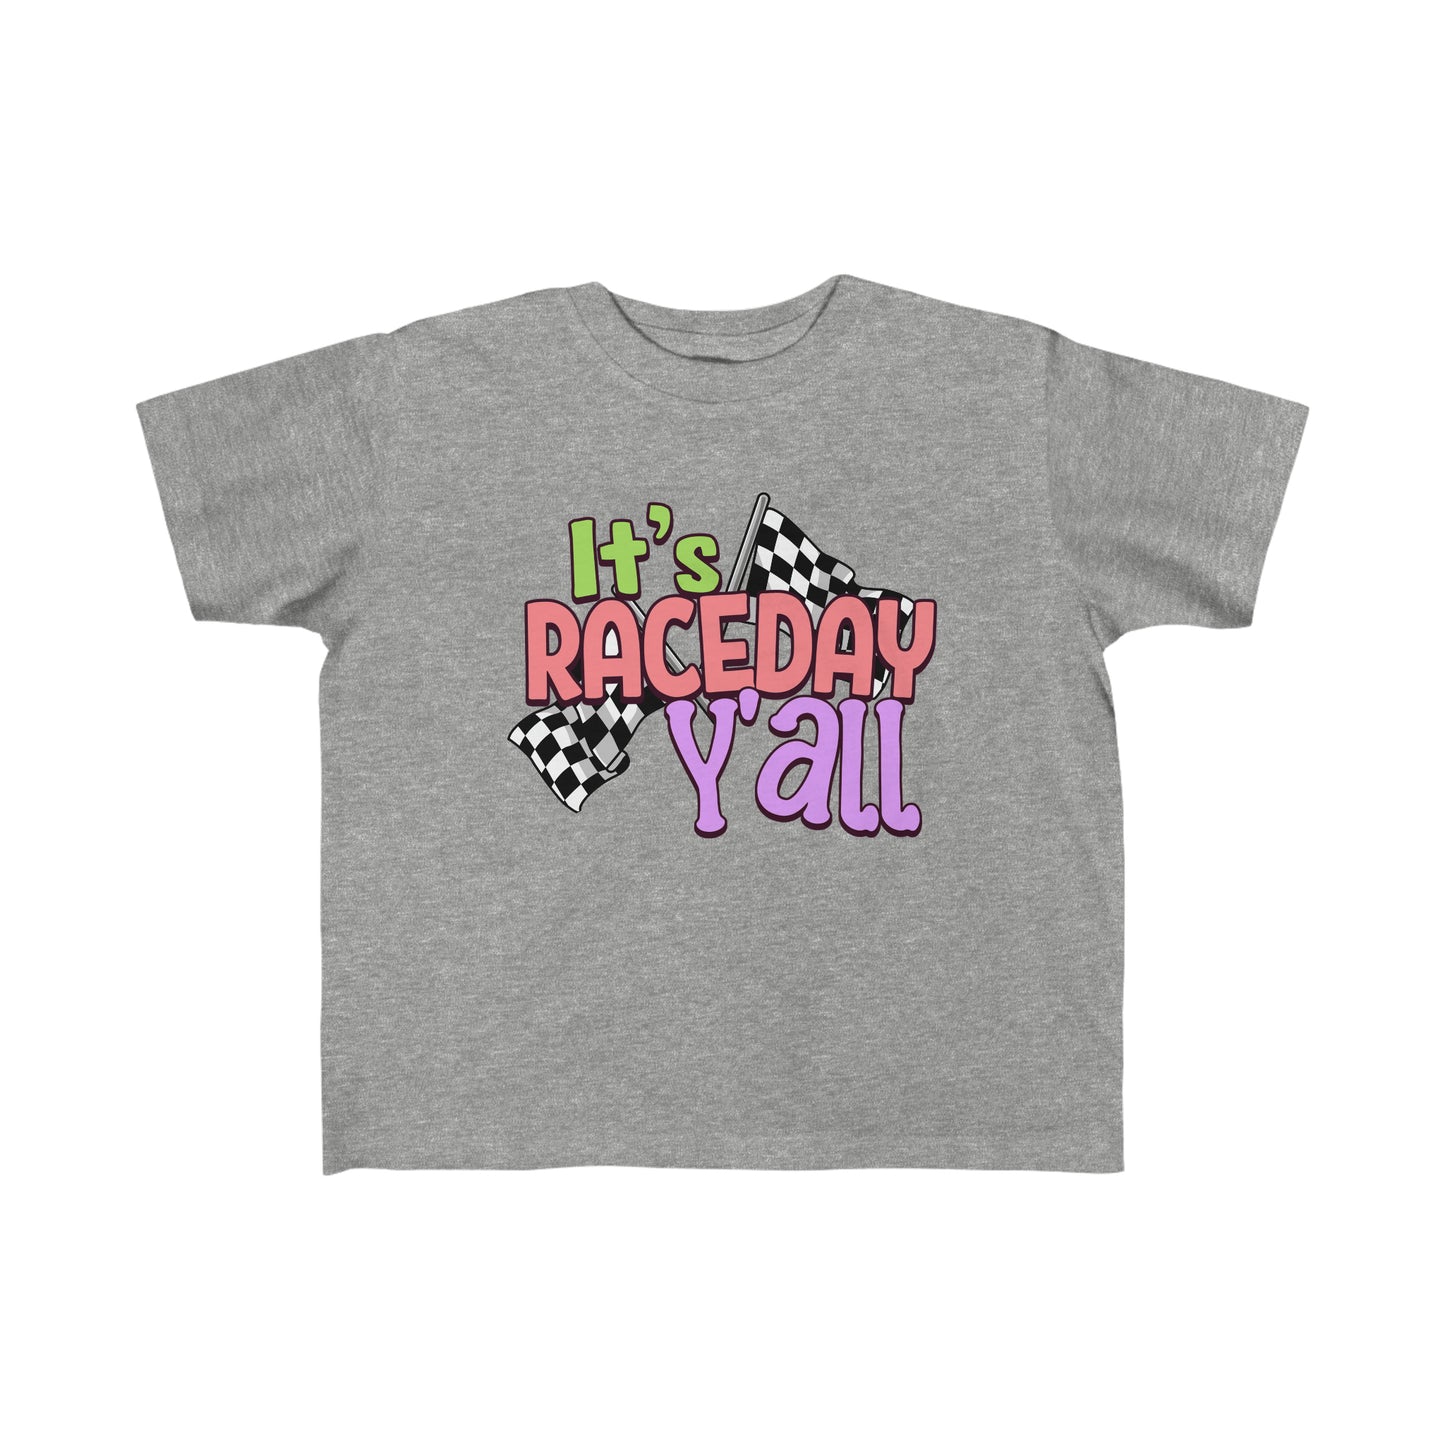 It's Raceday Y'all Toddler's Fine Jersey Tee